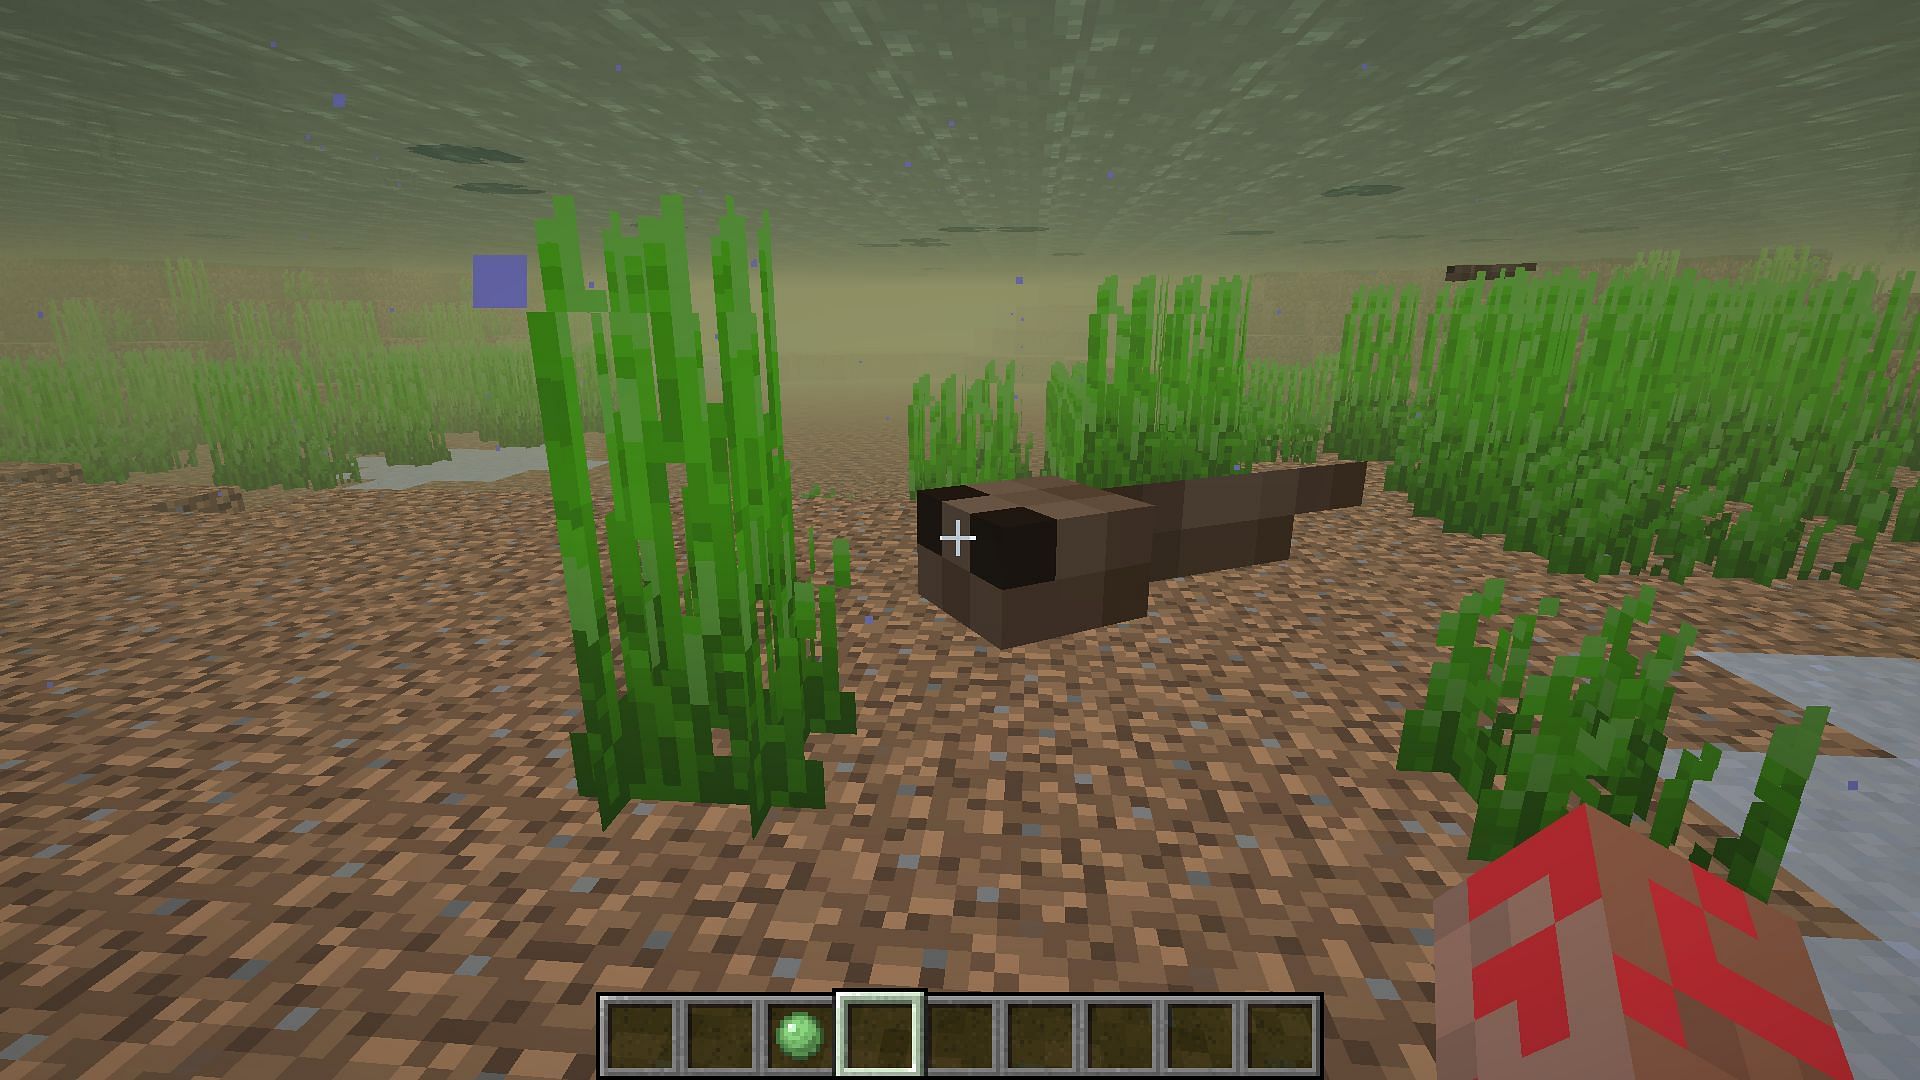 Tadpoles hatched from eggs (Image via Mojang)